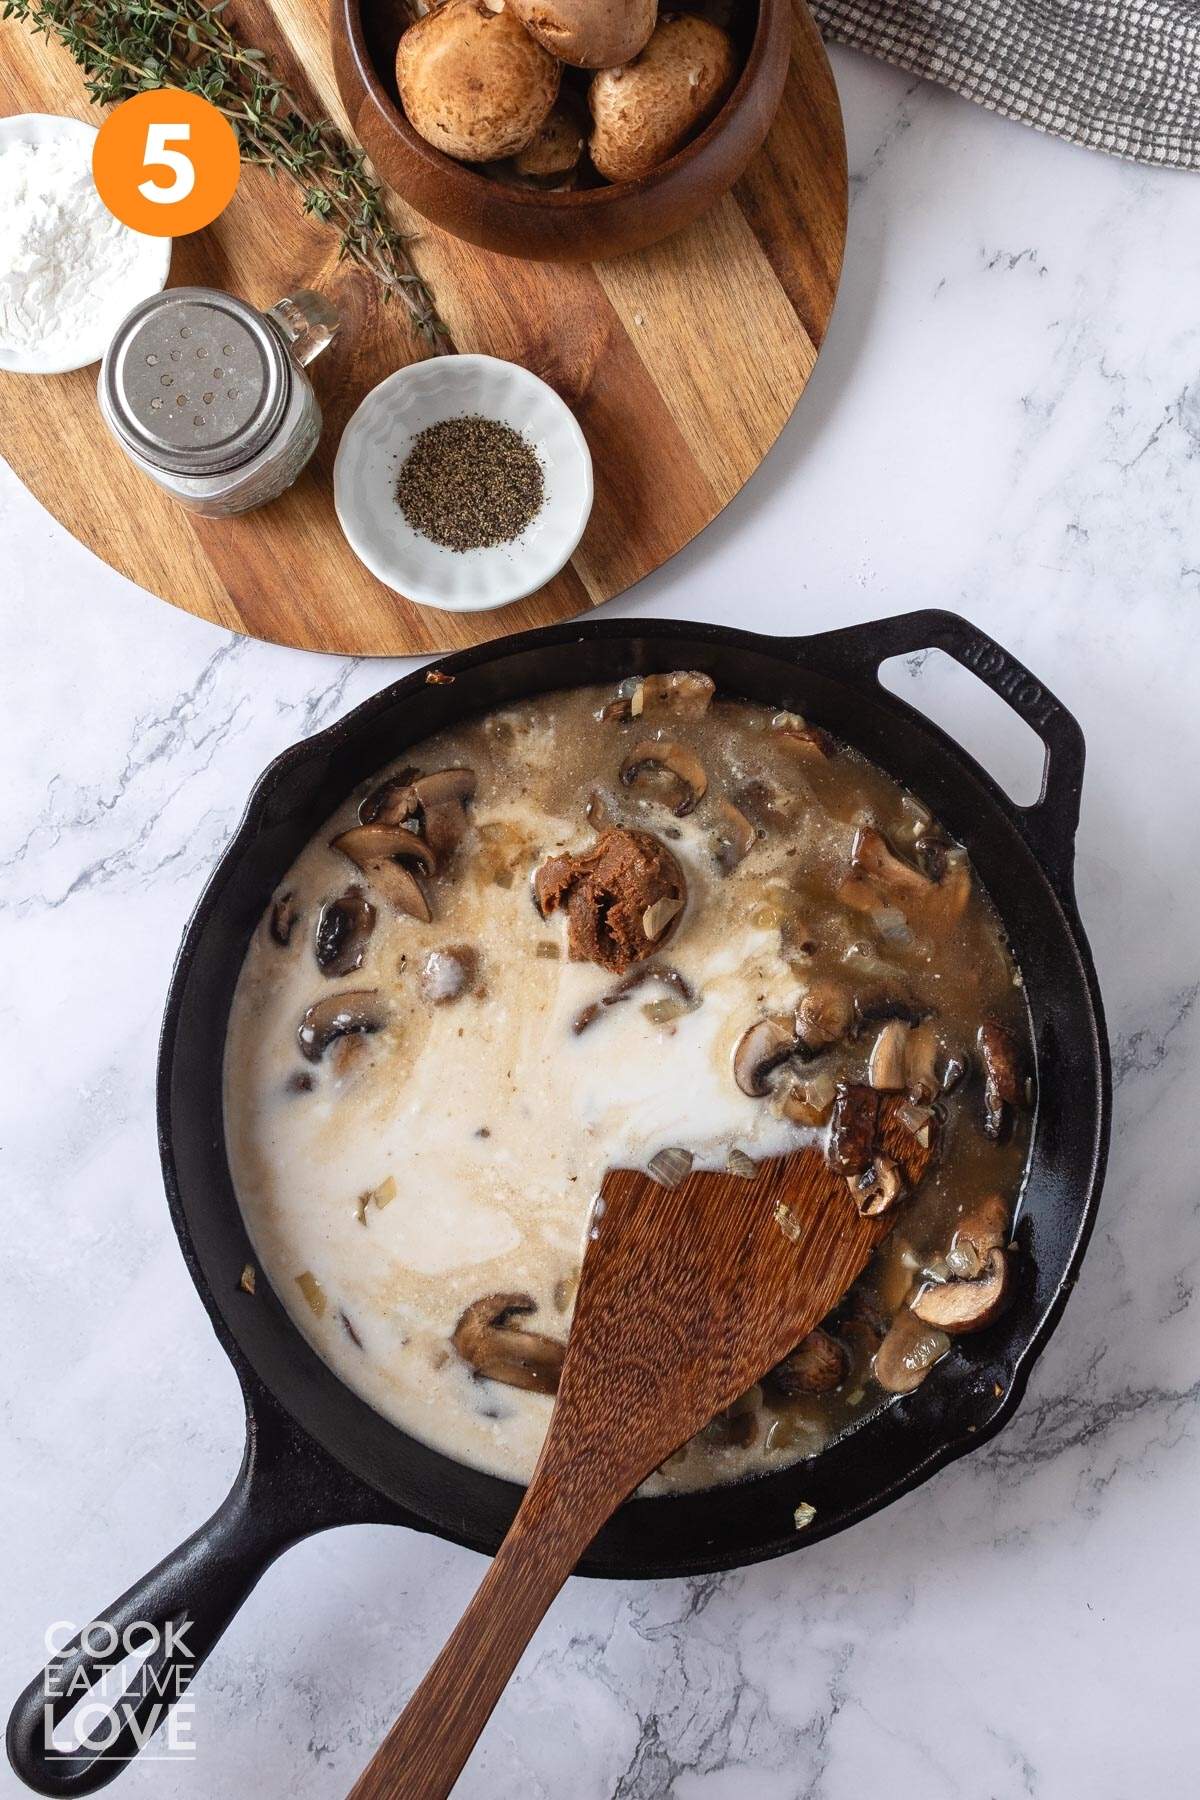 The miso and coconut milk is added to the skillet of mushroom sauce without cream.